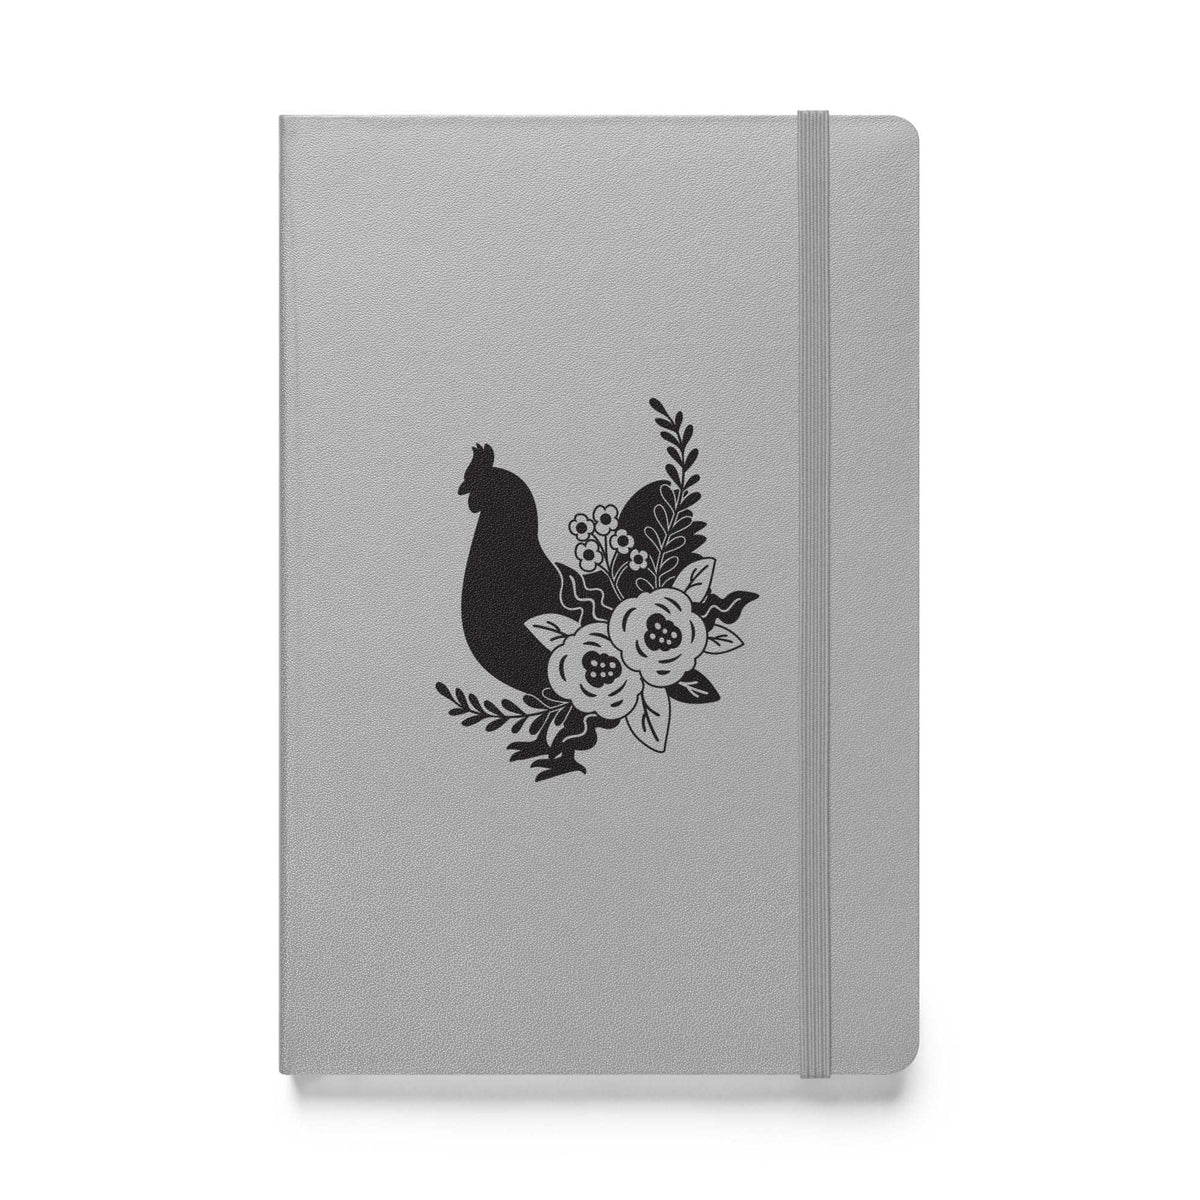 Floral Chicken Hardcover Bound Notebook - Cluck It All Farms